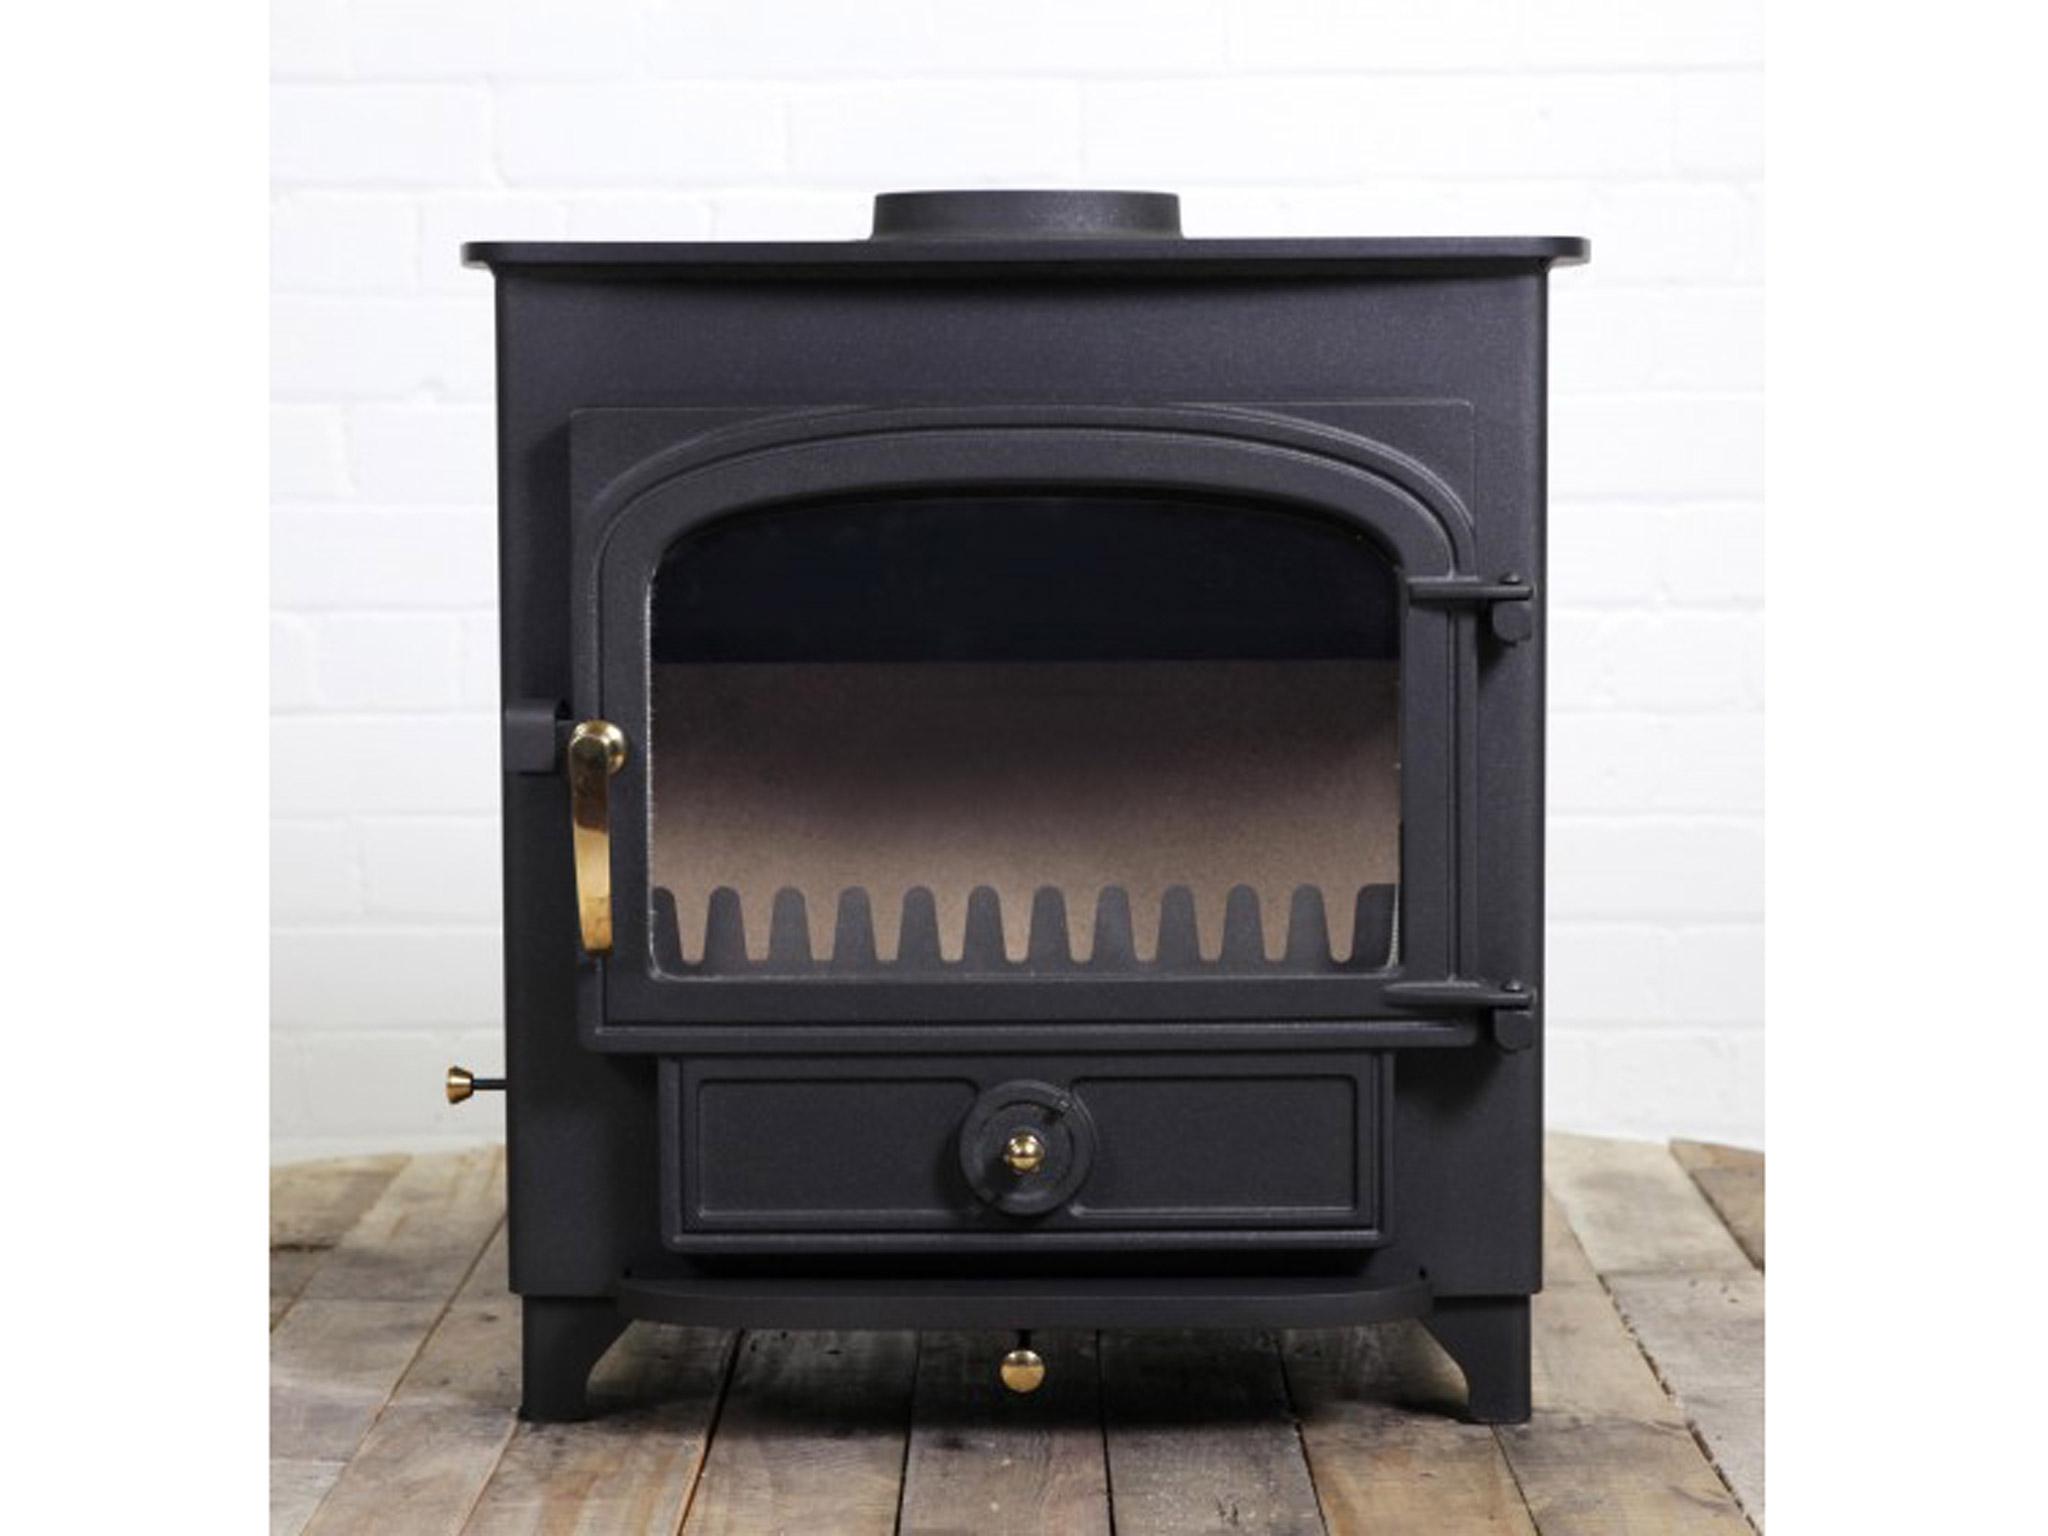 Are You Looking For Affordable Morso Stoves?